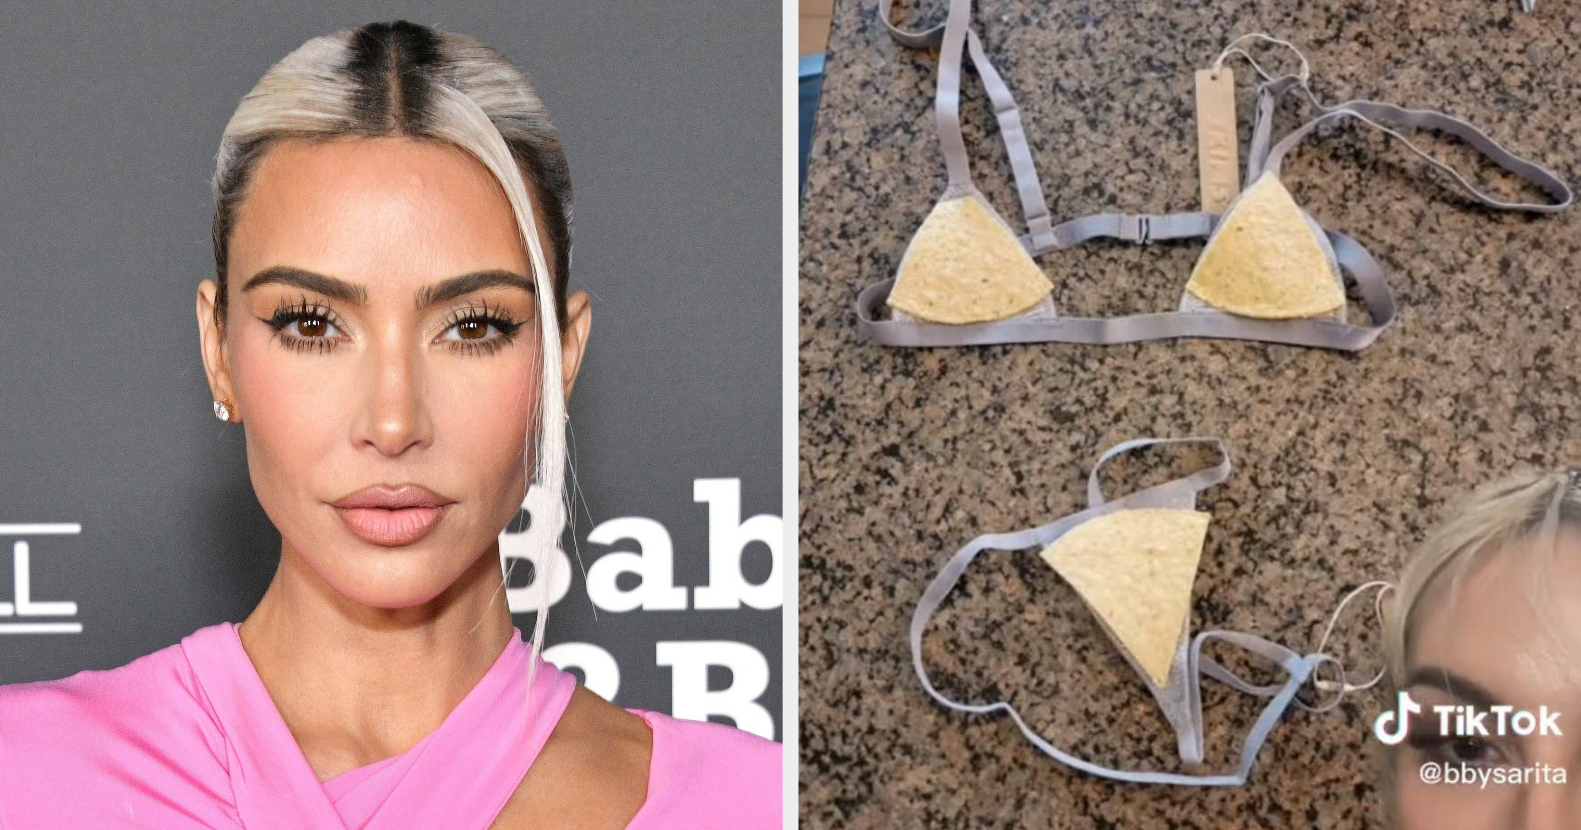 Kim Kardashian blasted for 'one size fits all' micro-thong that